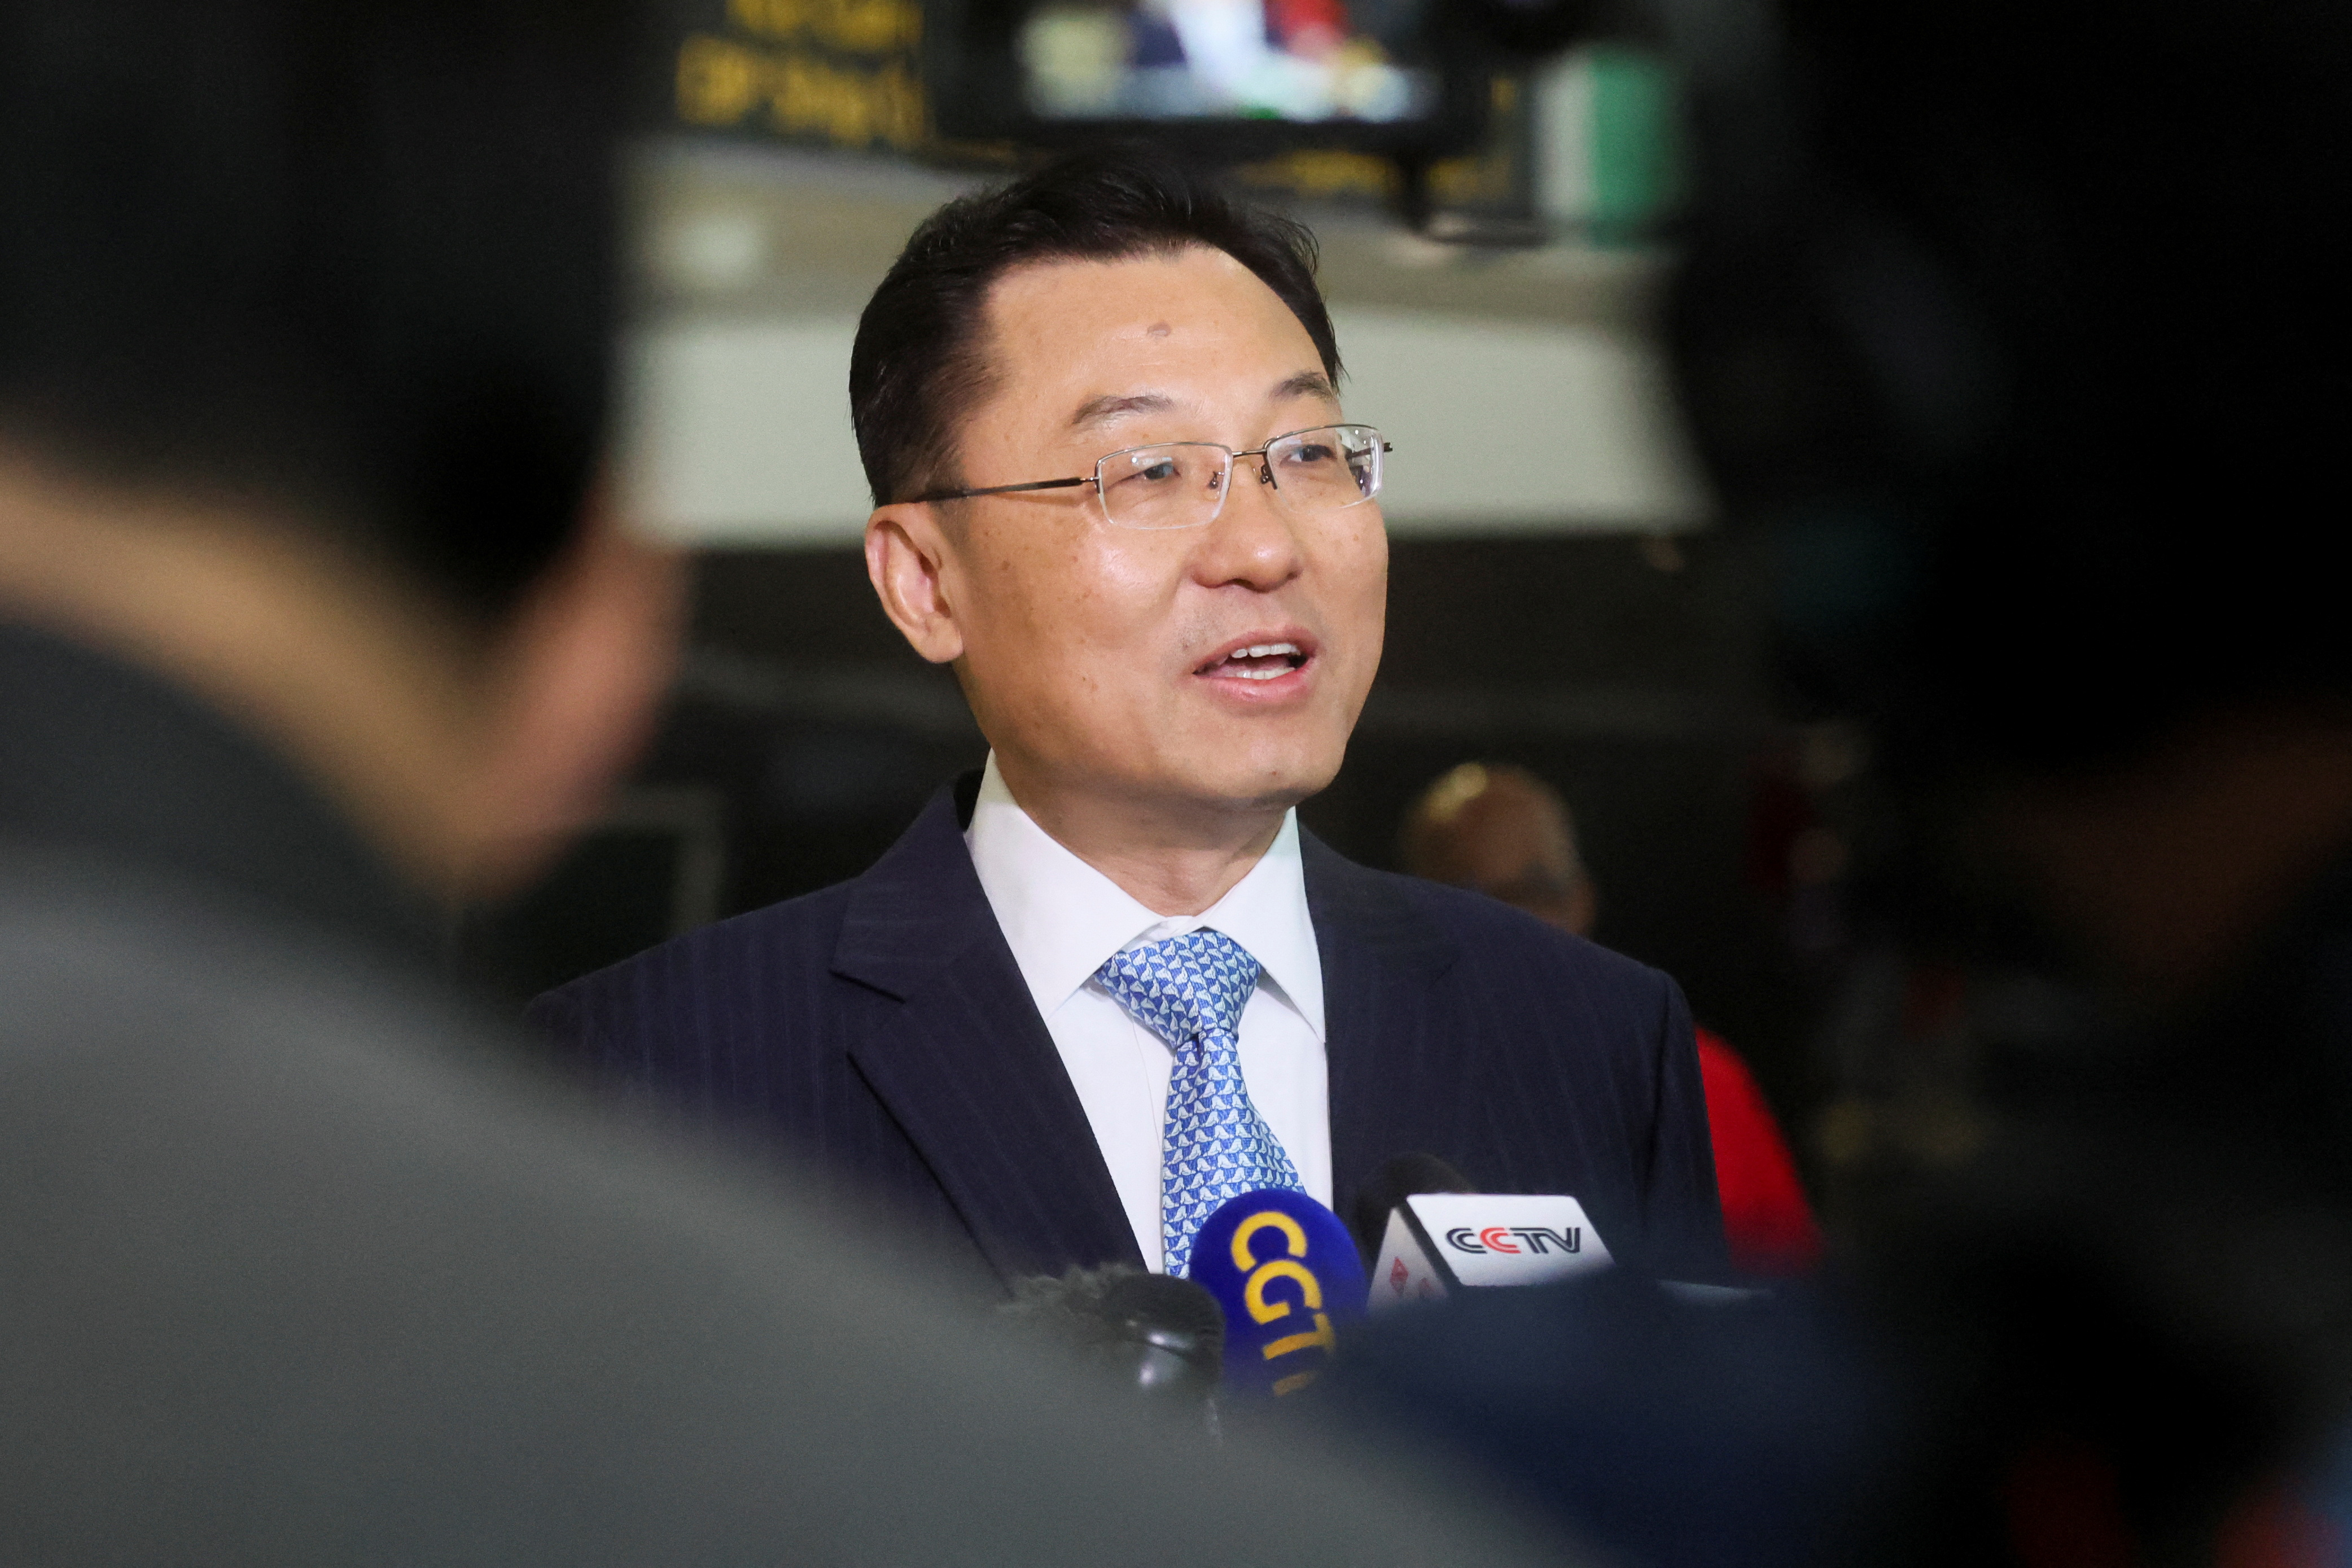 Xie Feng, China's new ambassador to the U.S., arrives at JFK airport in New York City